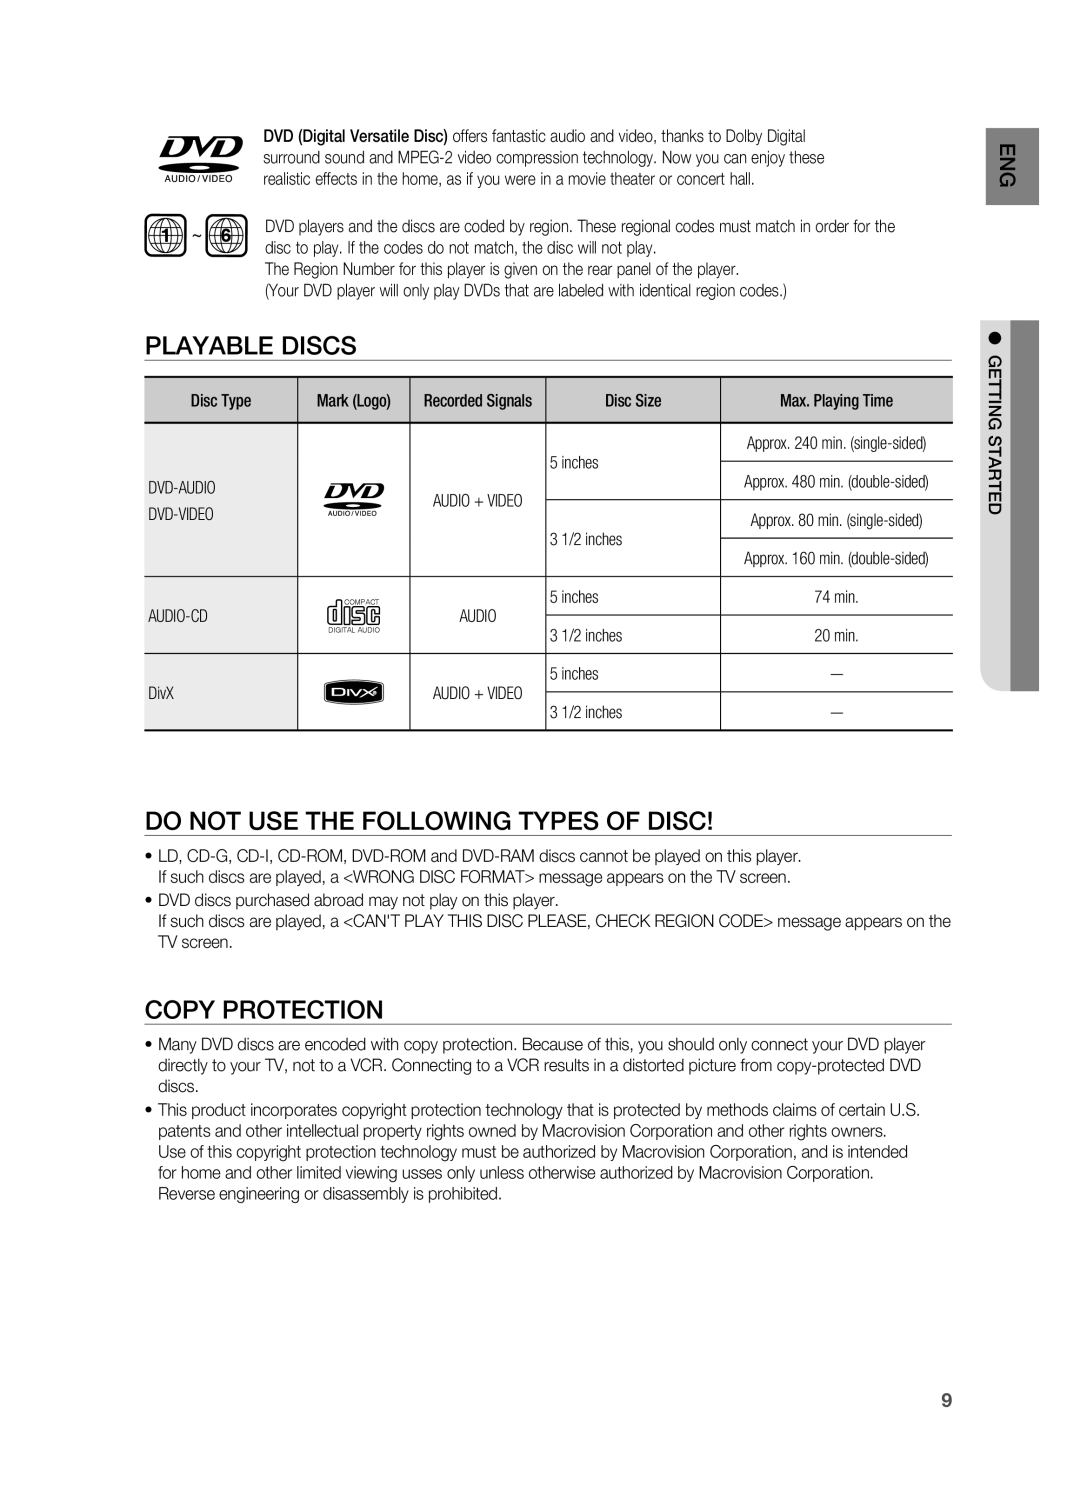 Samsung HT-TWZ415 user manual Playable Discs, Do not use the following types of disc, Copy Protection 